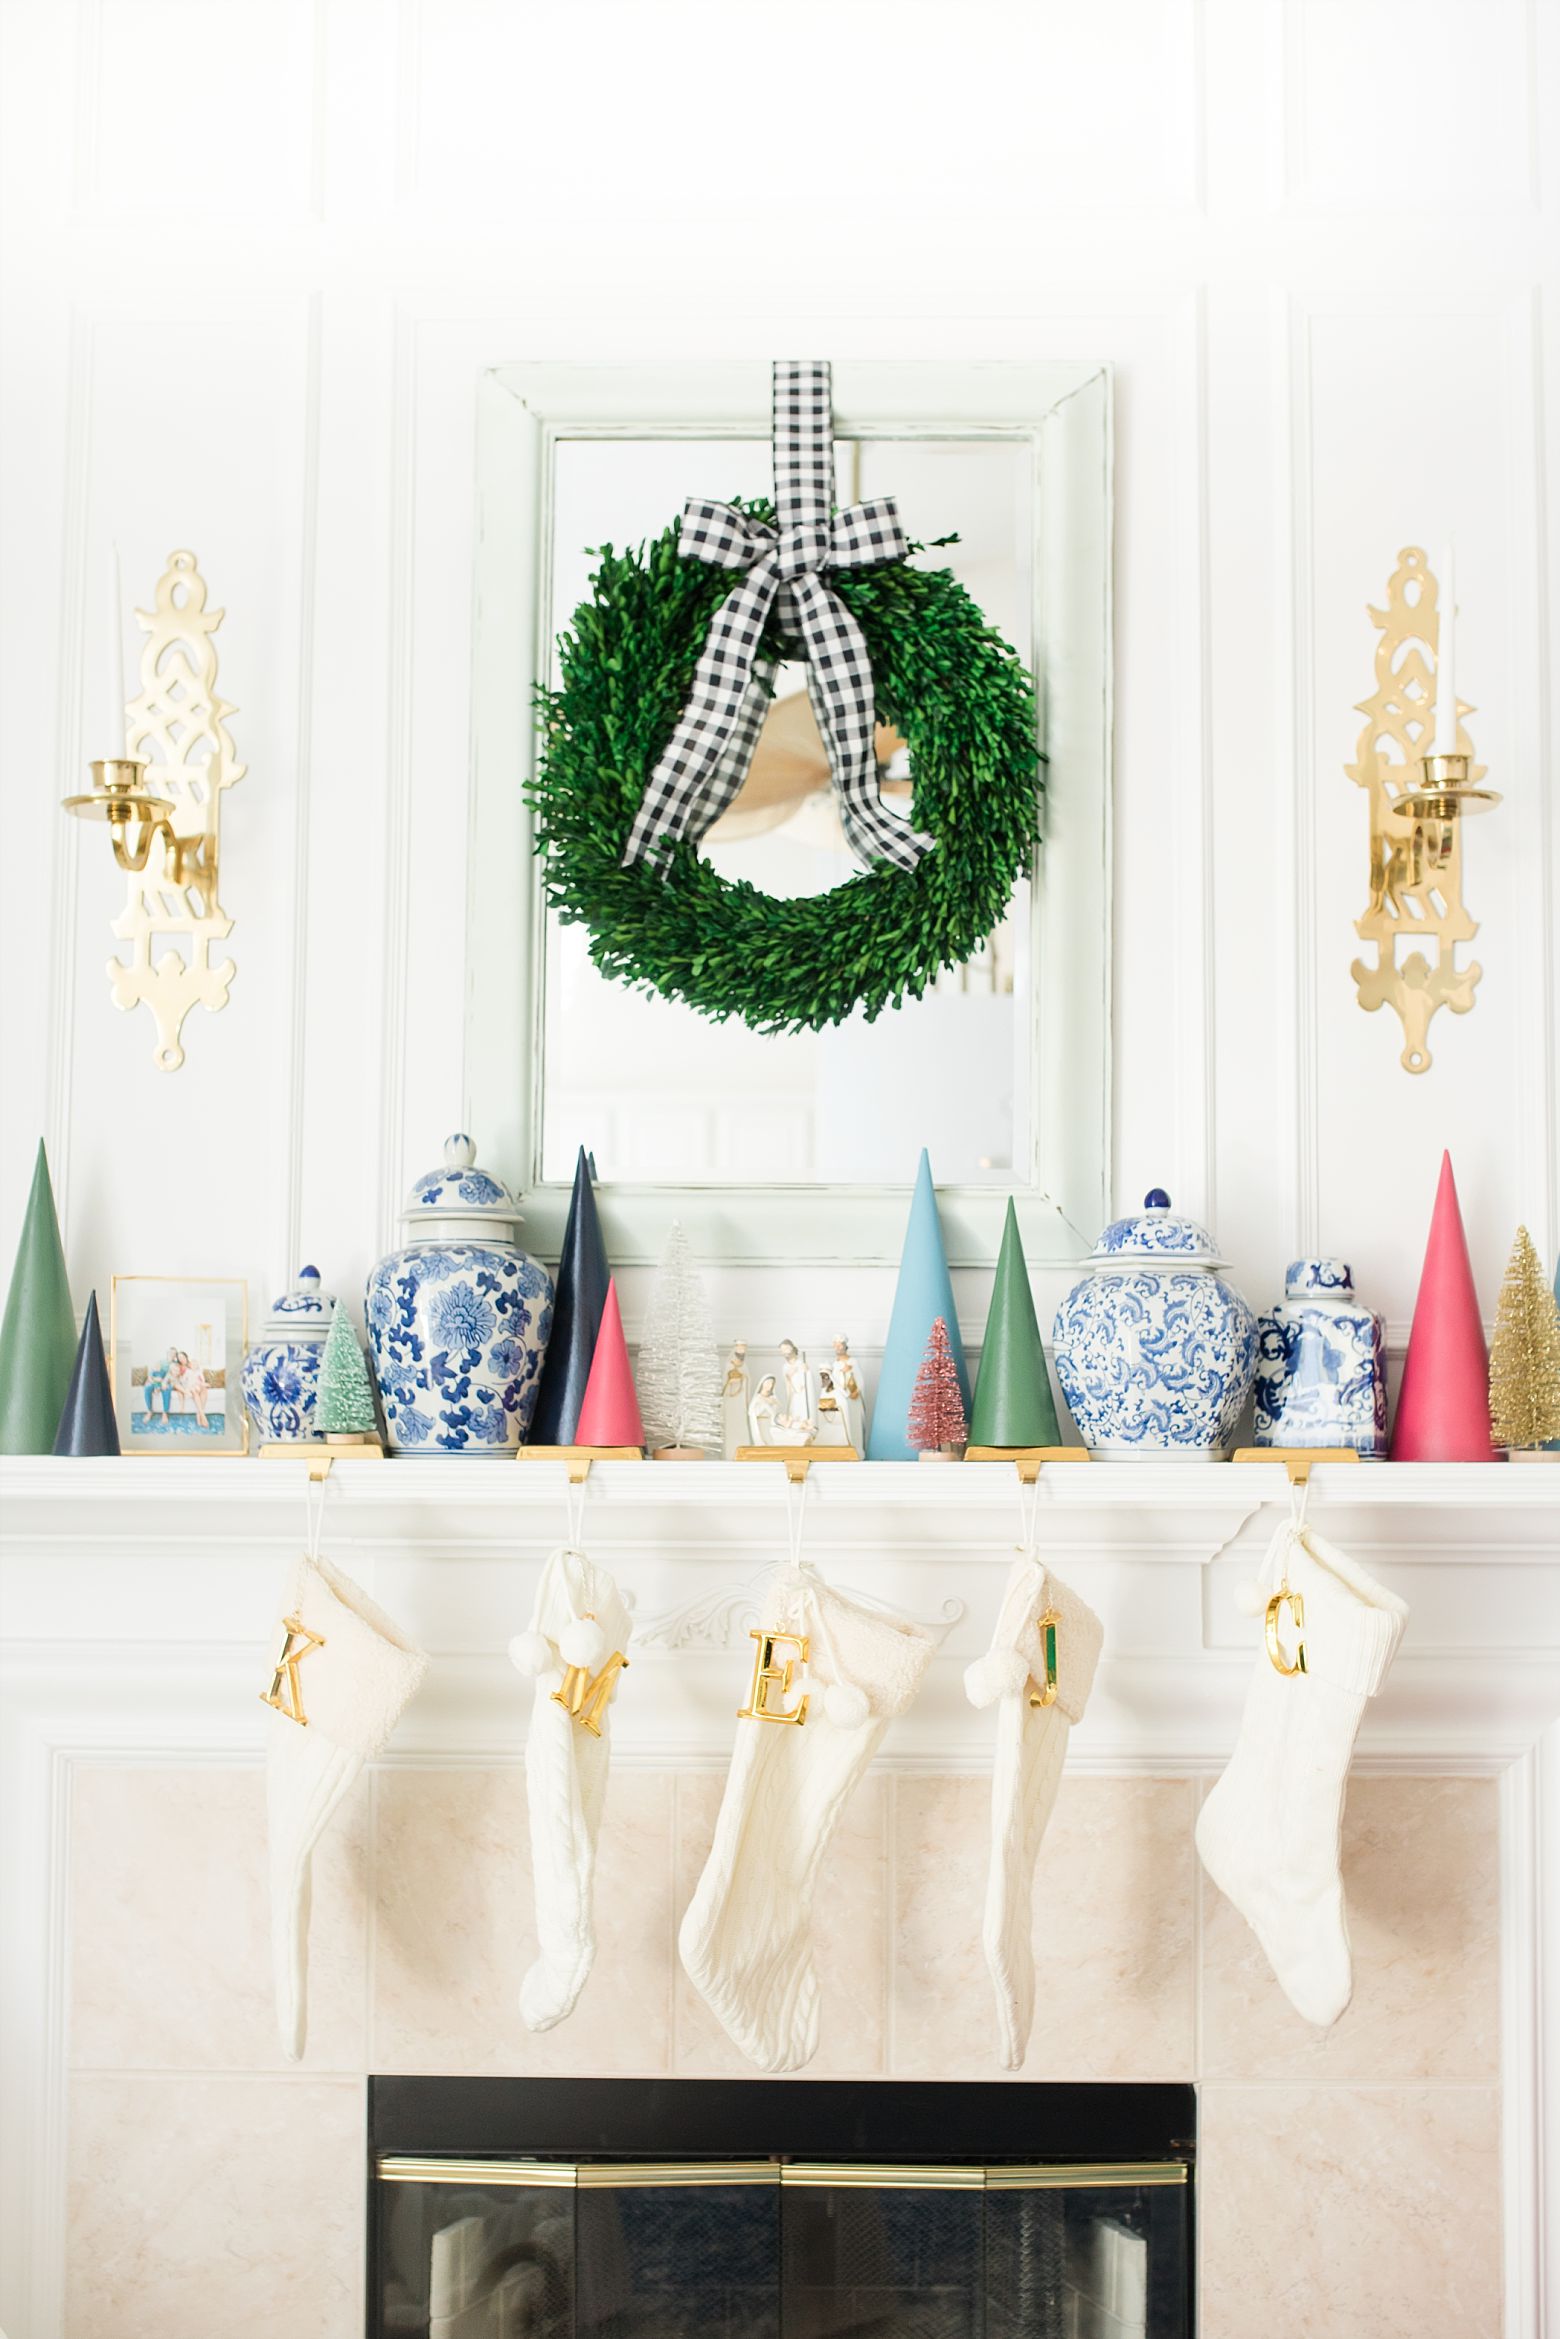 Colorful Christmas Mantel, White stockings, chinoiserie Christmas, blue and white jars